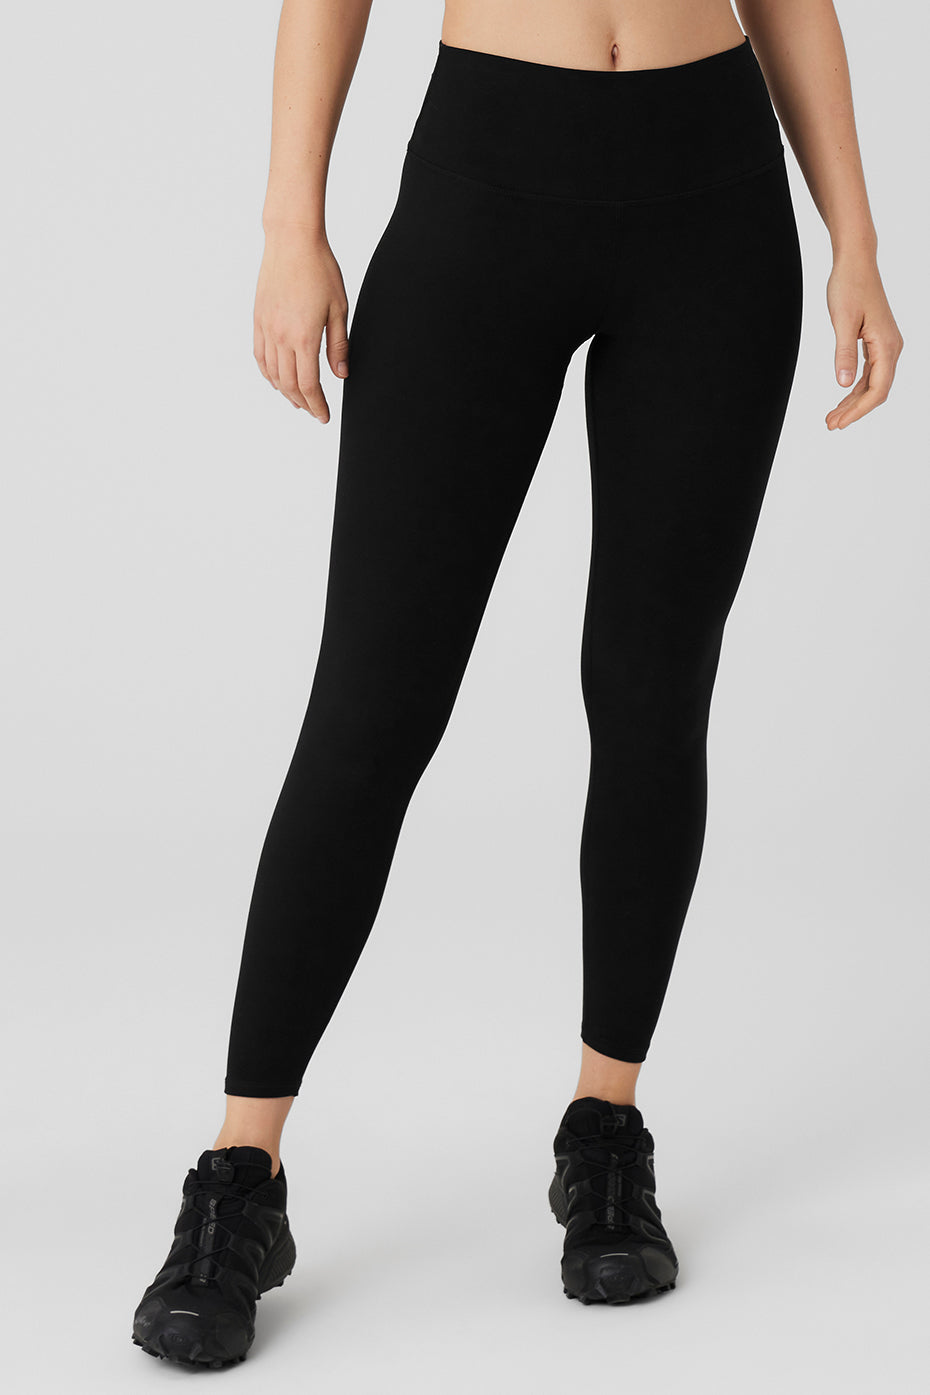 Alo yoga Black Leggings Fit Sample in Black Small waist 26-30, Women's  Fashion, Activewear on Carousell